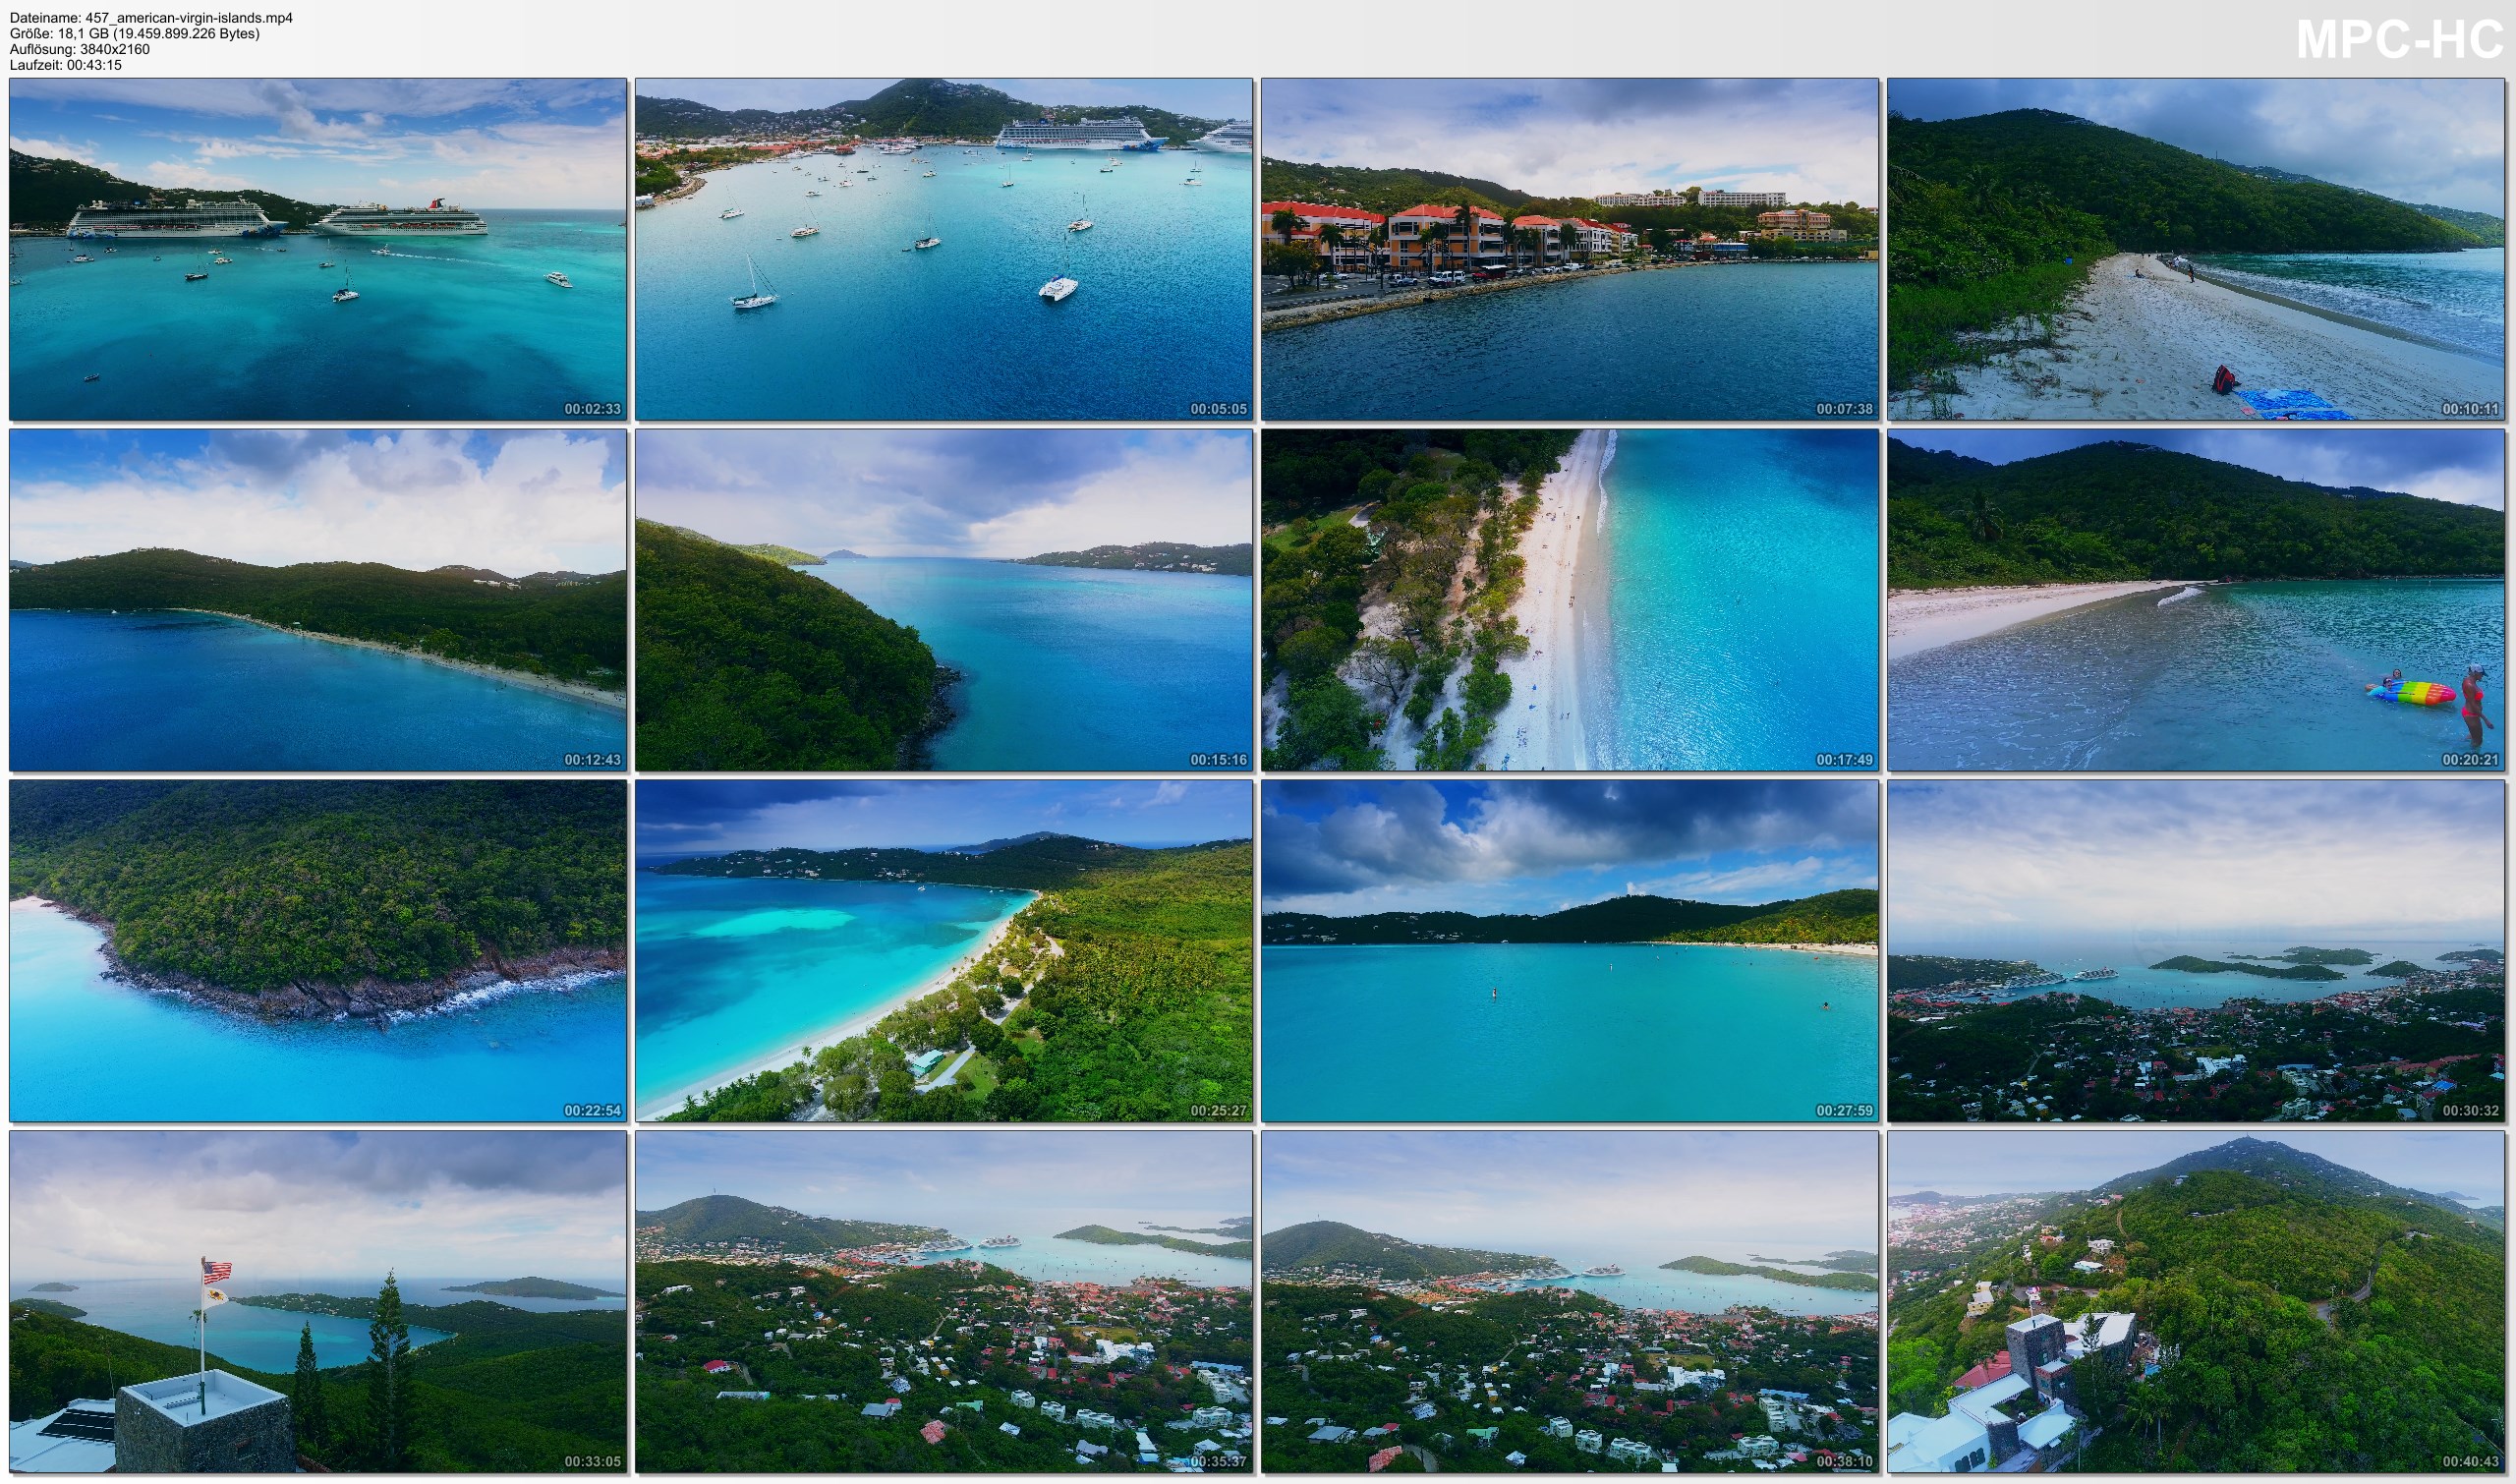 Drone Pictures from Video 【4K】Drone RAW Footage | These are the AMERICAN VIRGIN ISLANDS 2020 | U.S. Thomas UltraHD Stock Video